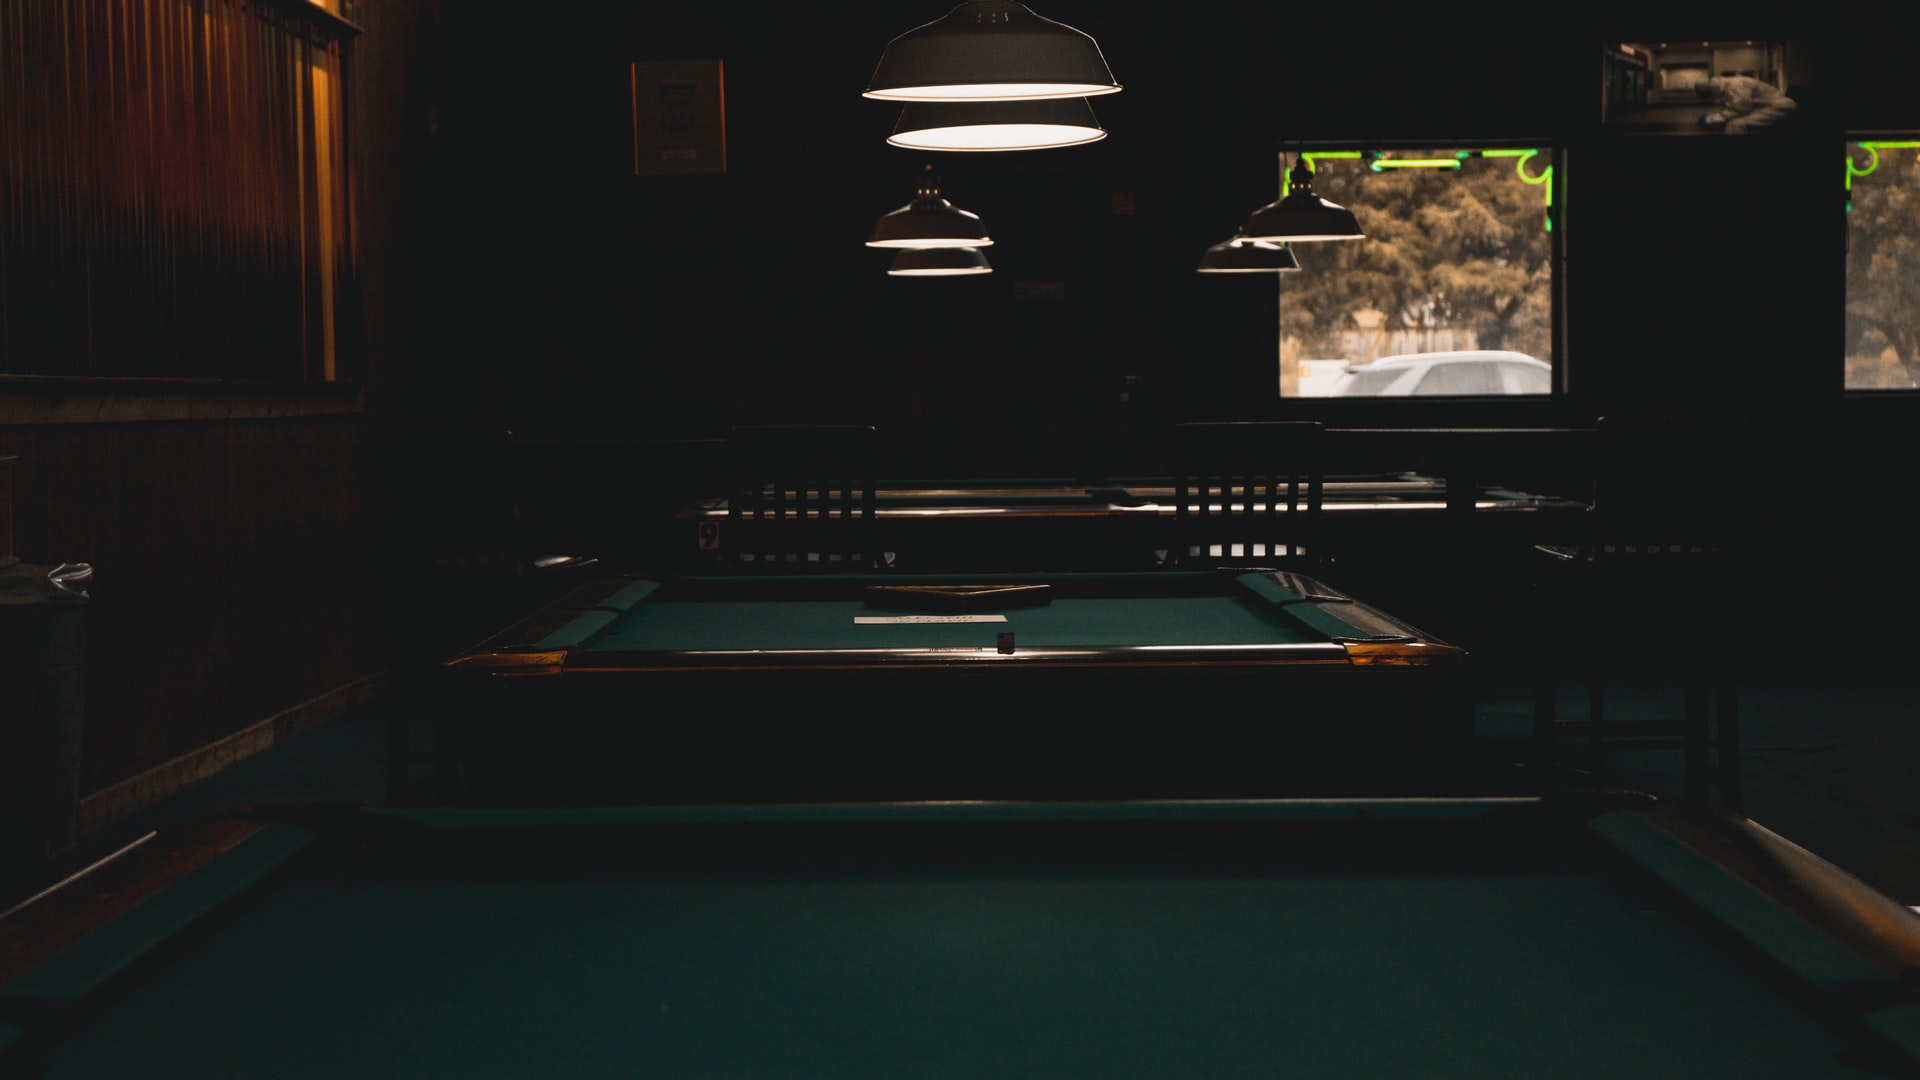 How can you tell if a pool table is antique?